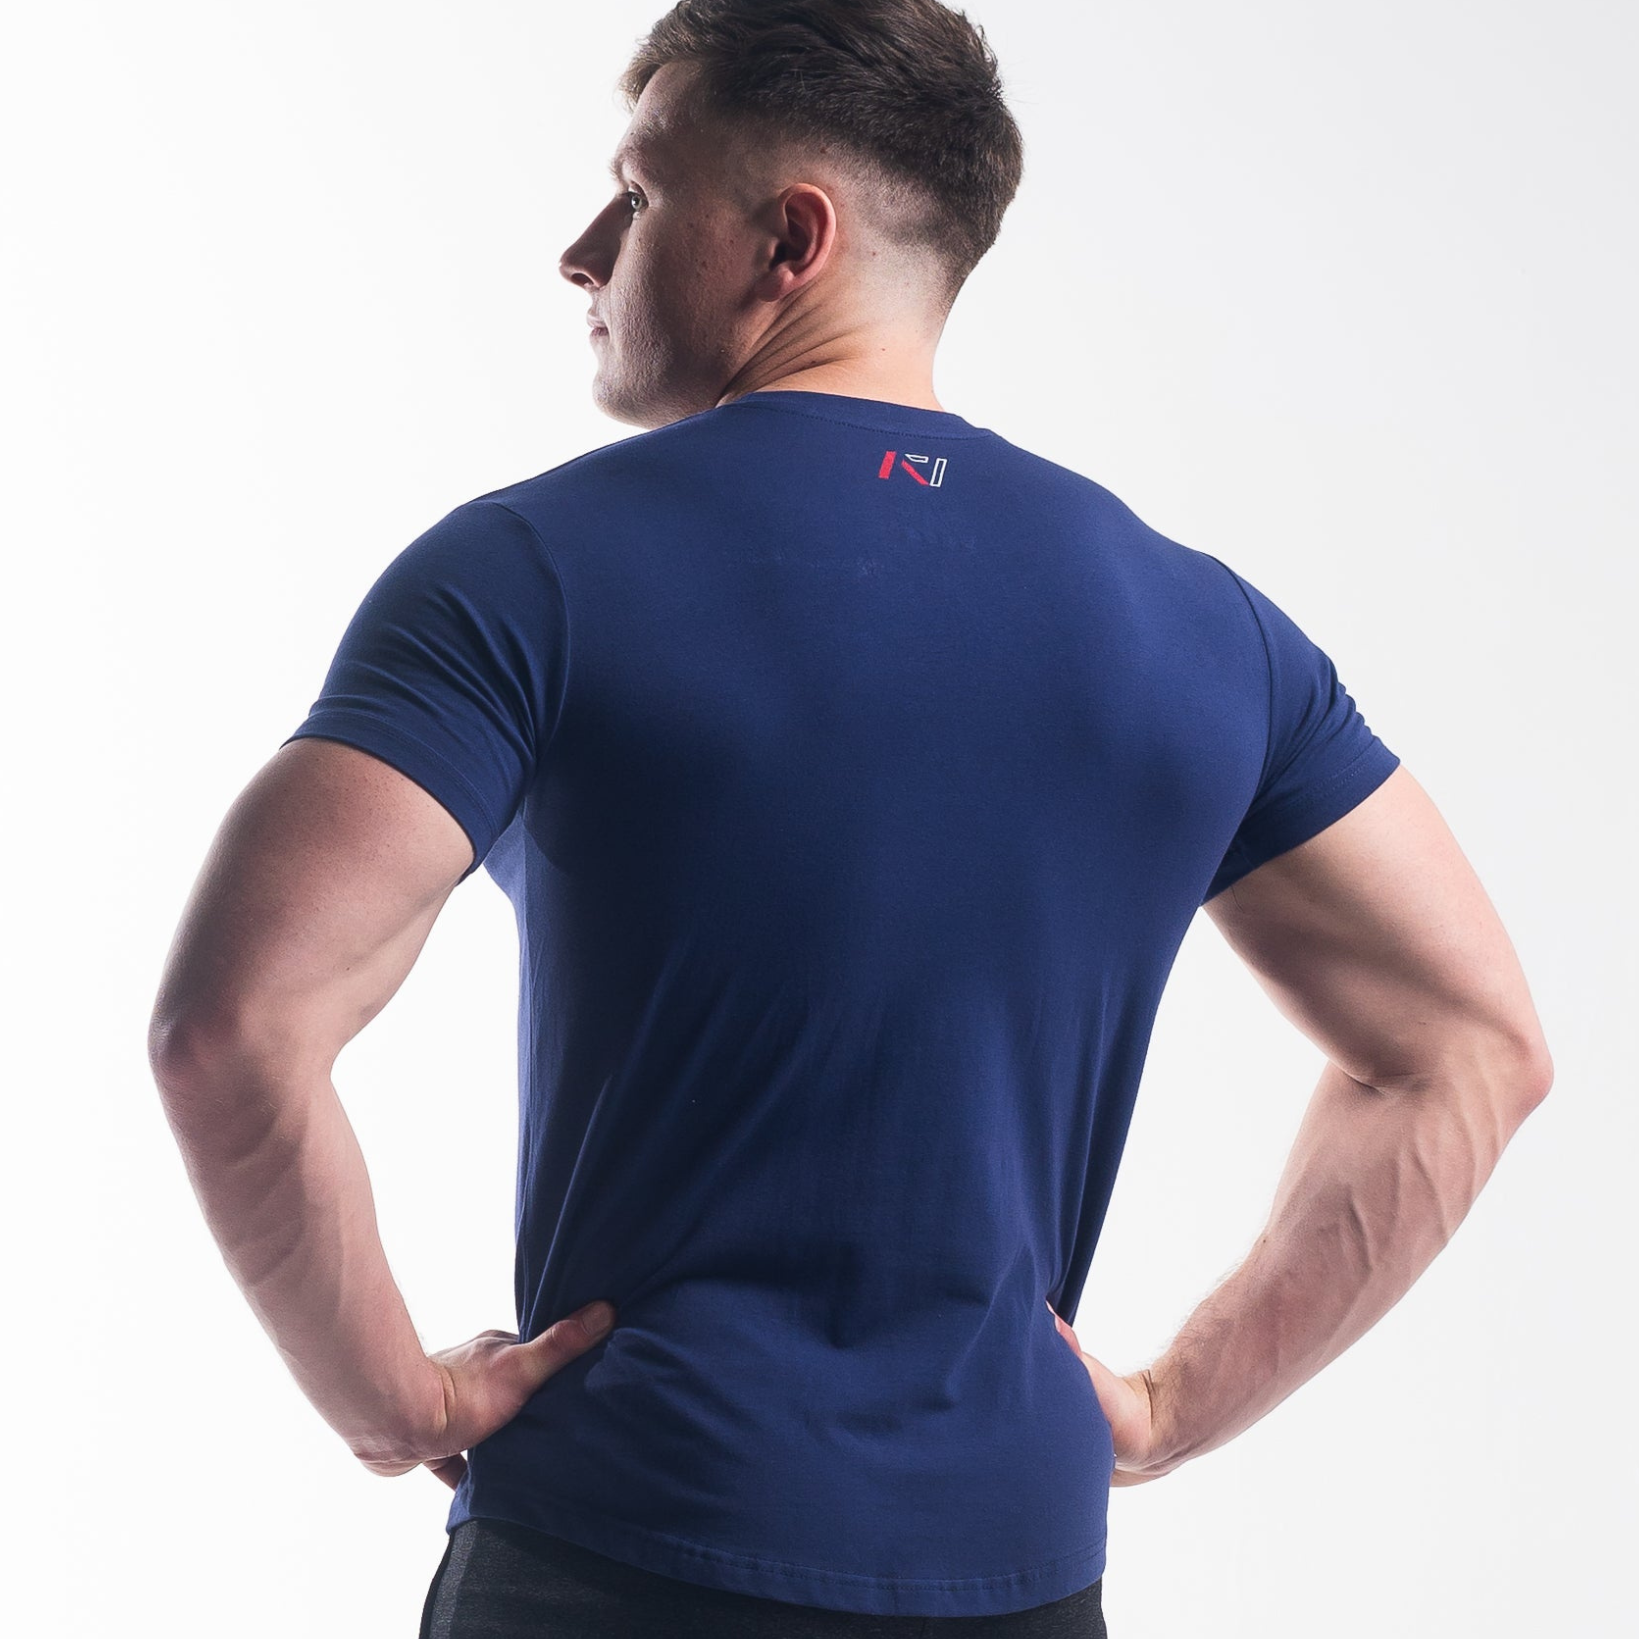 Night Light RWB Wave Non Bar Grip Shirt features one of our favorite designs that showcases your patriotic spirit with our Red White and Blue colour palette! Genouillères powerlifting shipping to France, Spain, Ireland, Germany, Italy, Sweden and EU. 